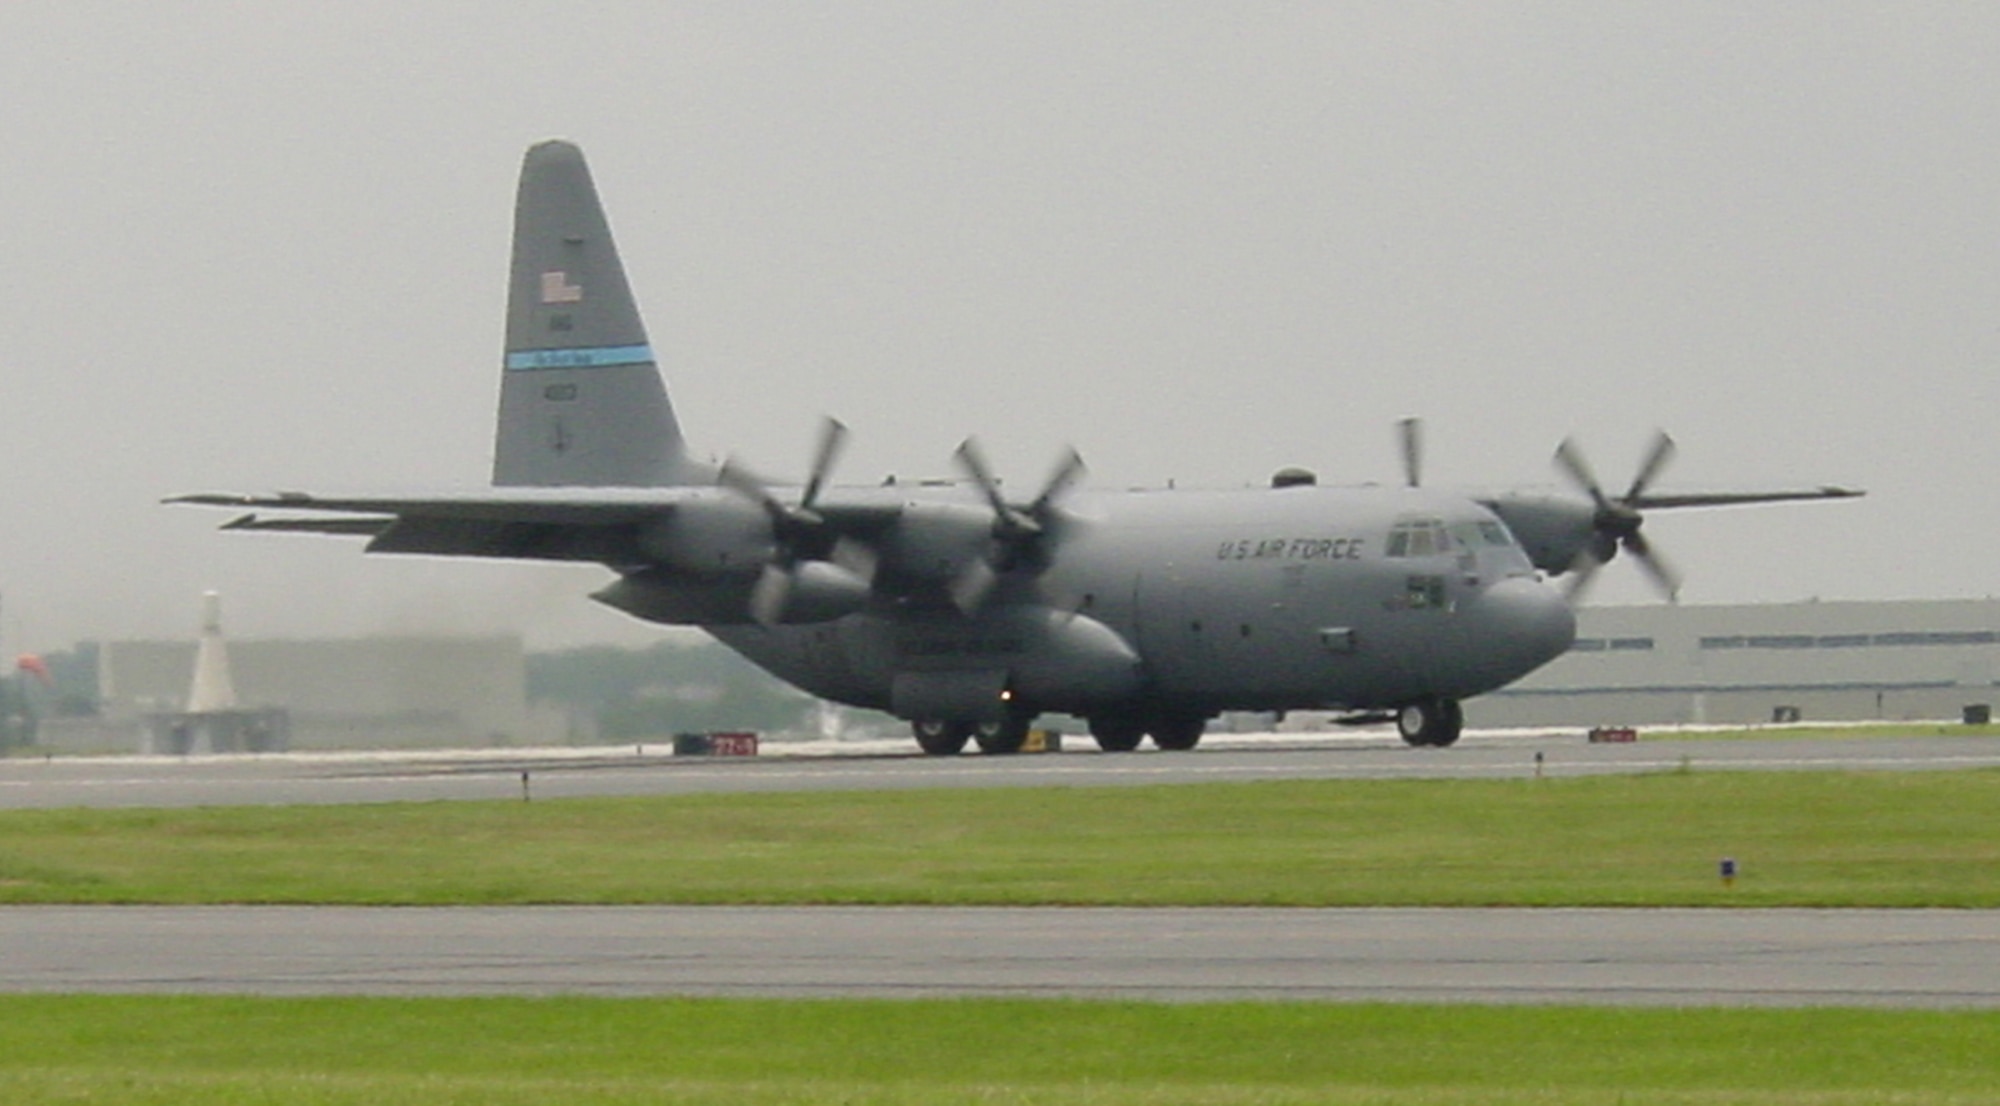 C-130 aircraft # 213, Delaware Air National Guard, moments after landing on June 5, 2008. Unit aircrew flew the aircraft past the 10,000 flying hour milestone, the first C-130H aircraft in the unit's inventory to reach this mark. The fleet of C-130H aircraft arrived factory-fresh in the mid-1980s to the New Castle air base.